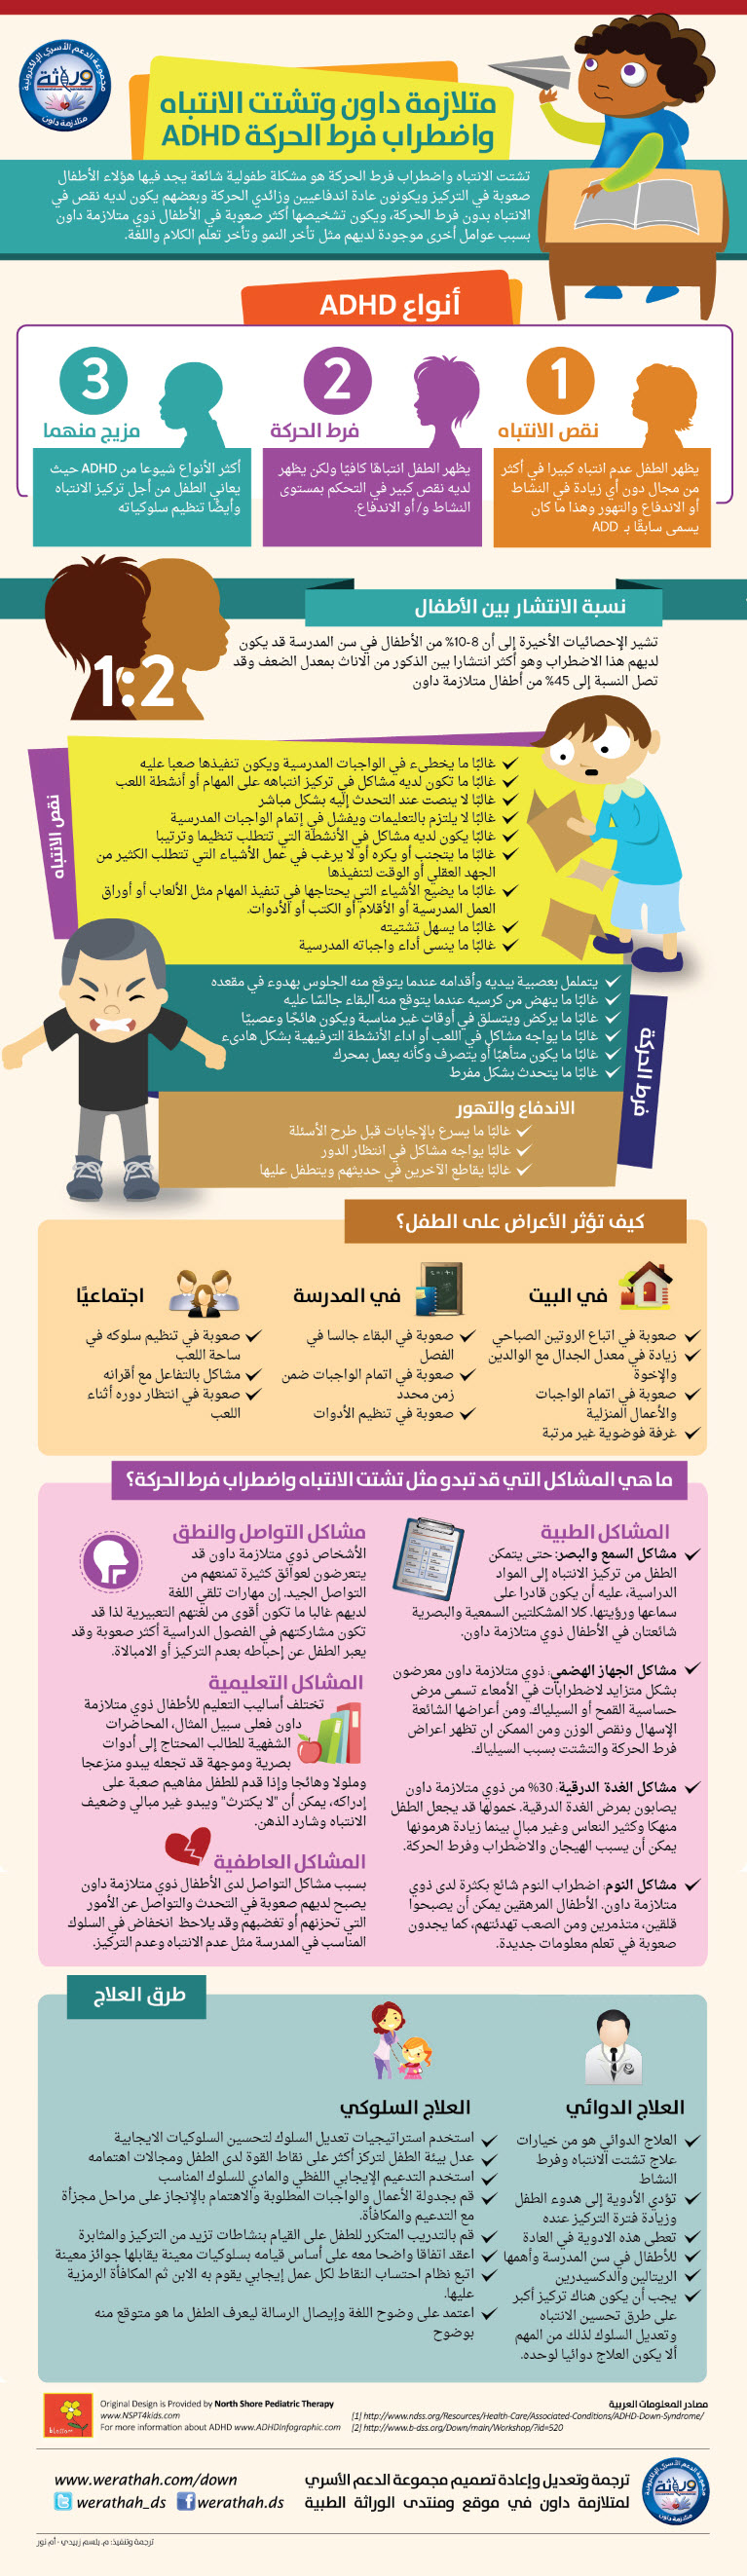 ADHD_DS_infographic_small